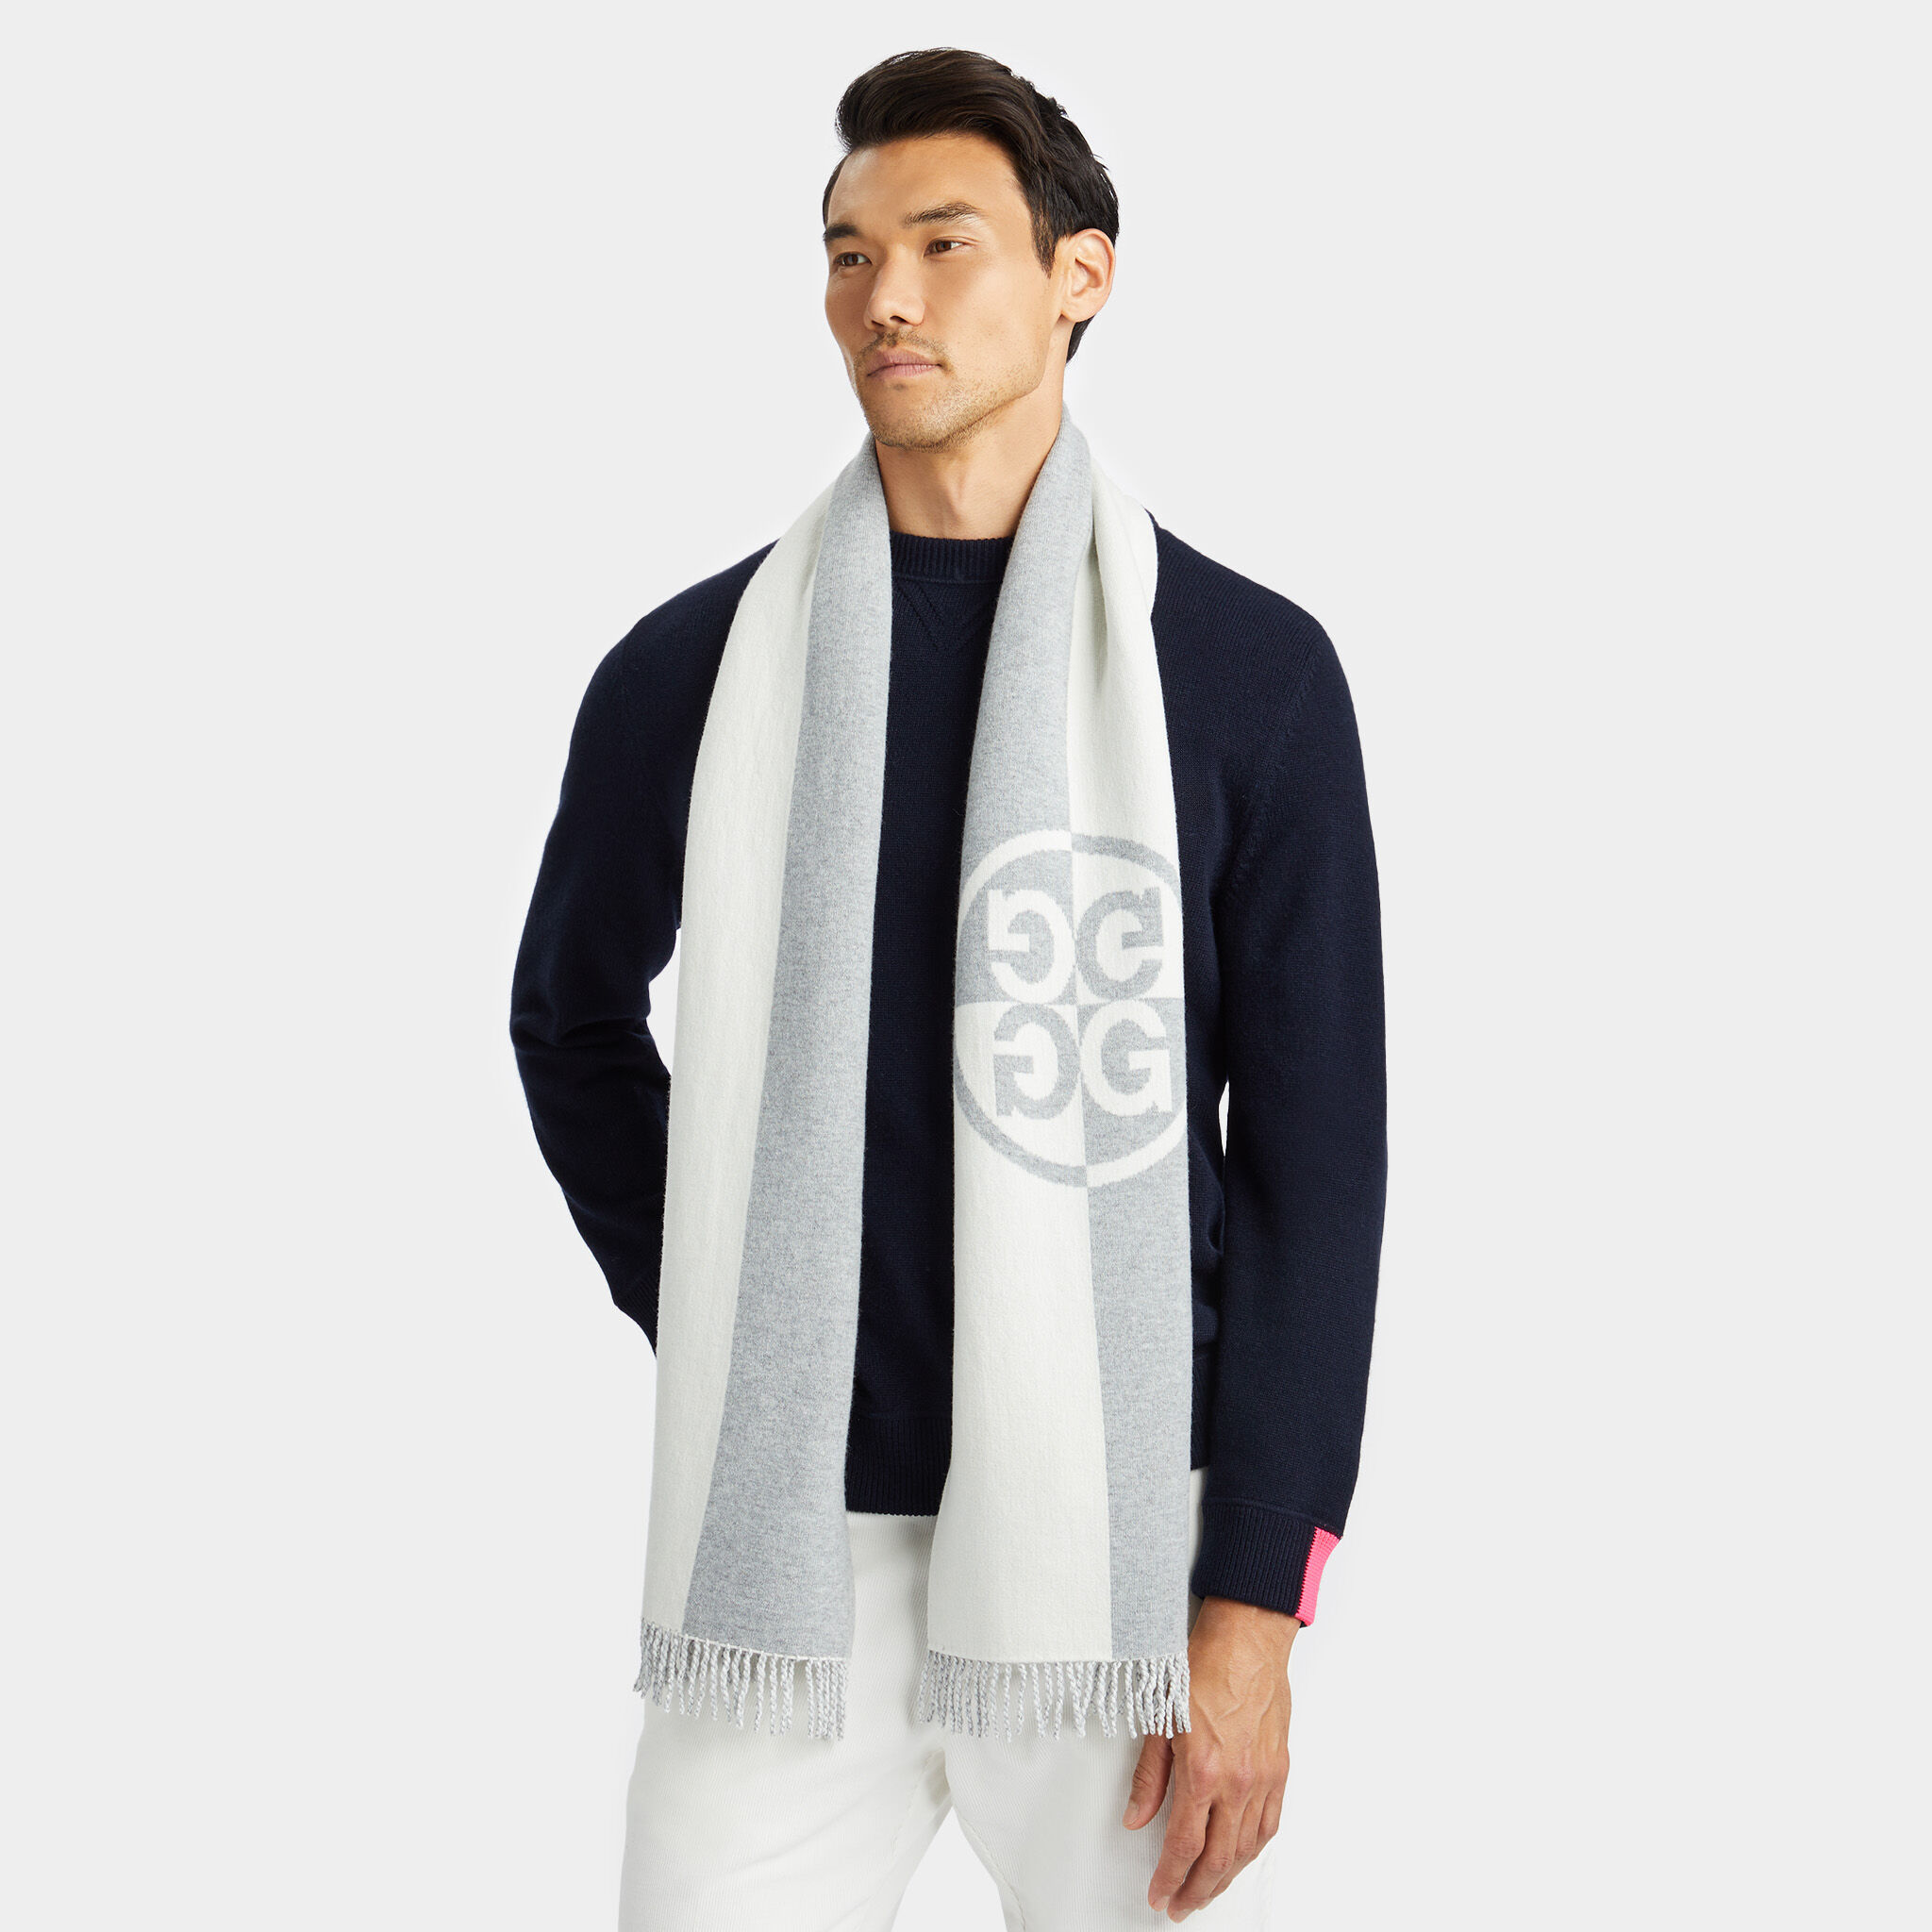 LIMITED EDITION CIRCLE G'S CASHMERE BLEND SCARF | MEN'S